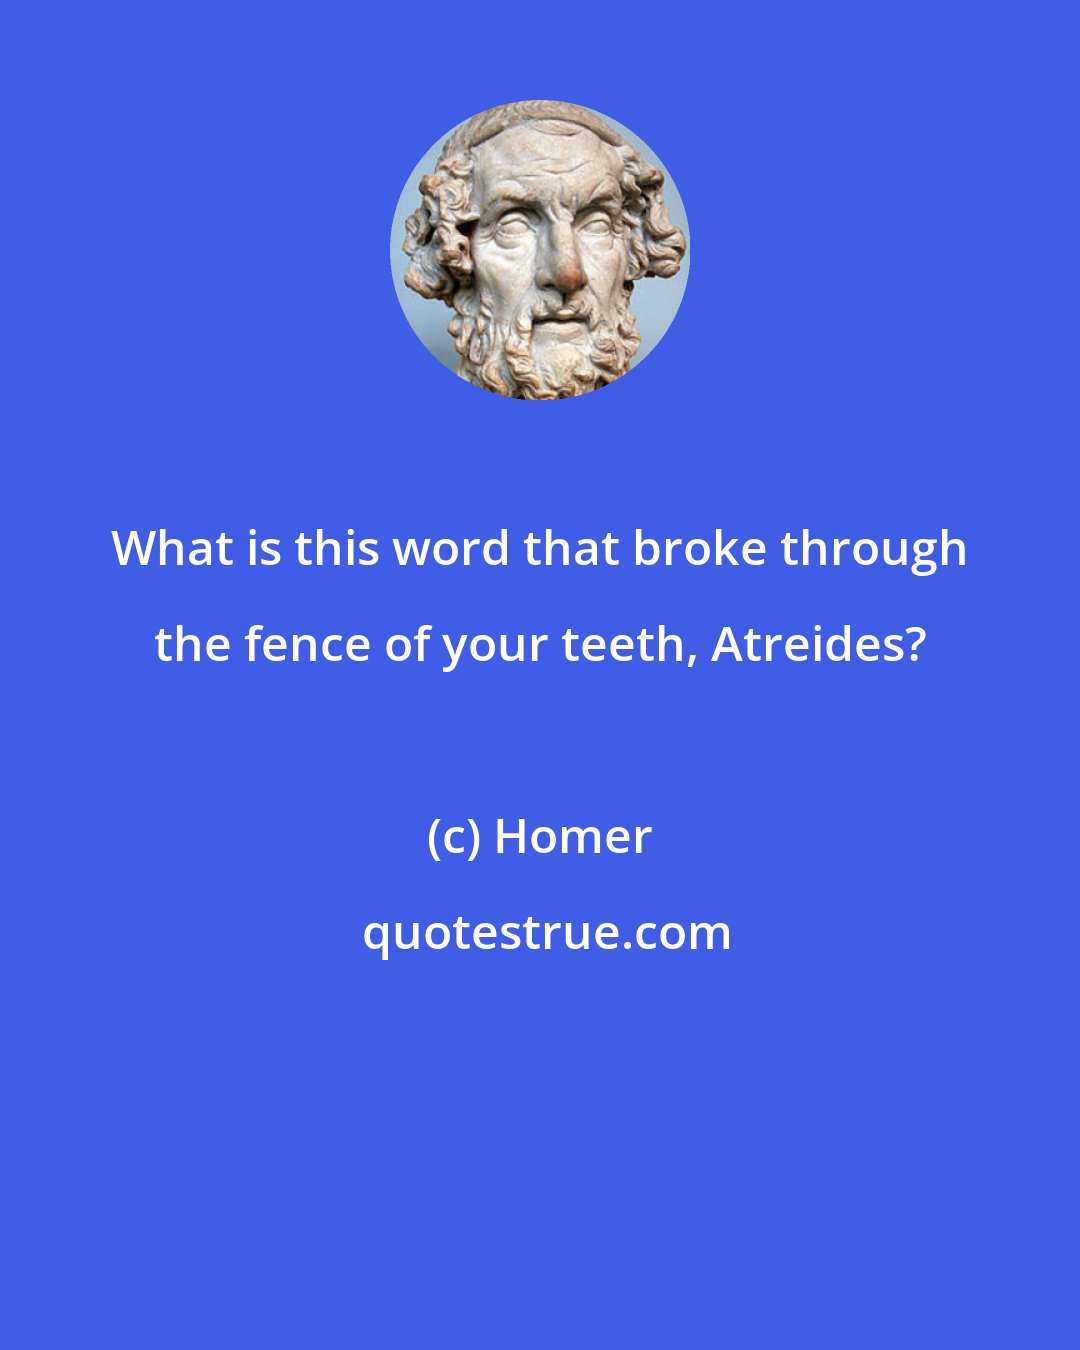 Homer: What is this word that broke through the fence of your teeth, Atreides?